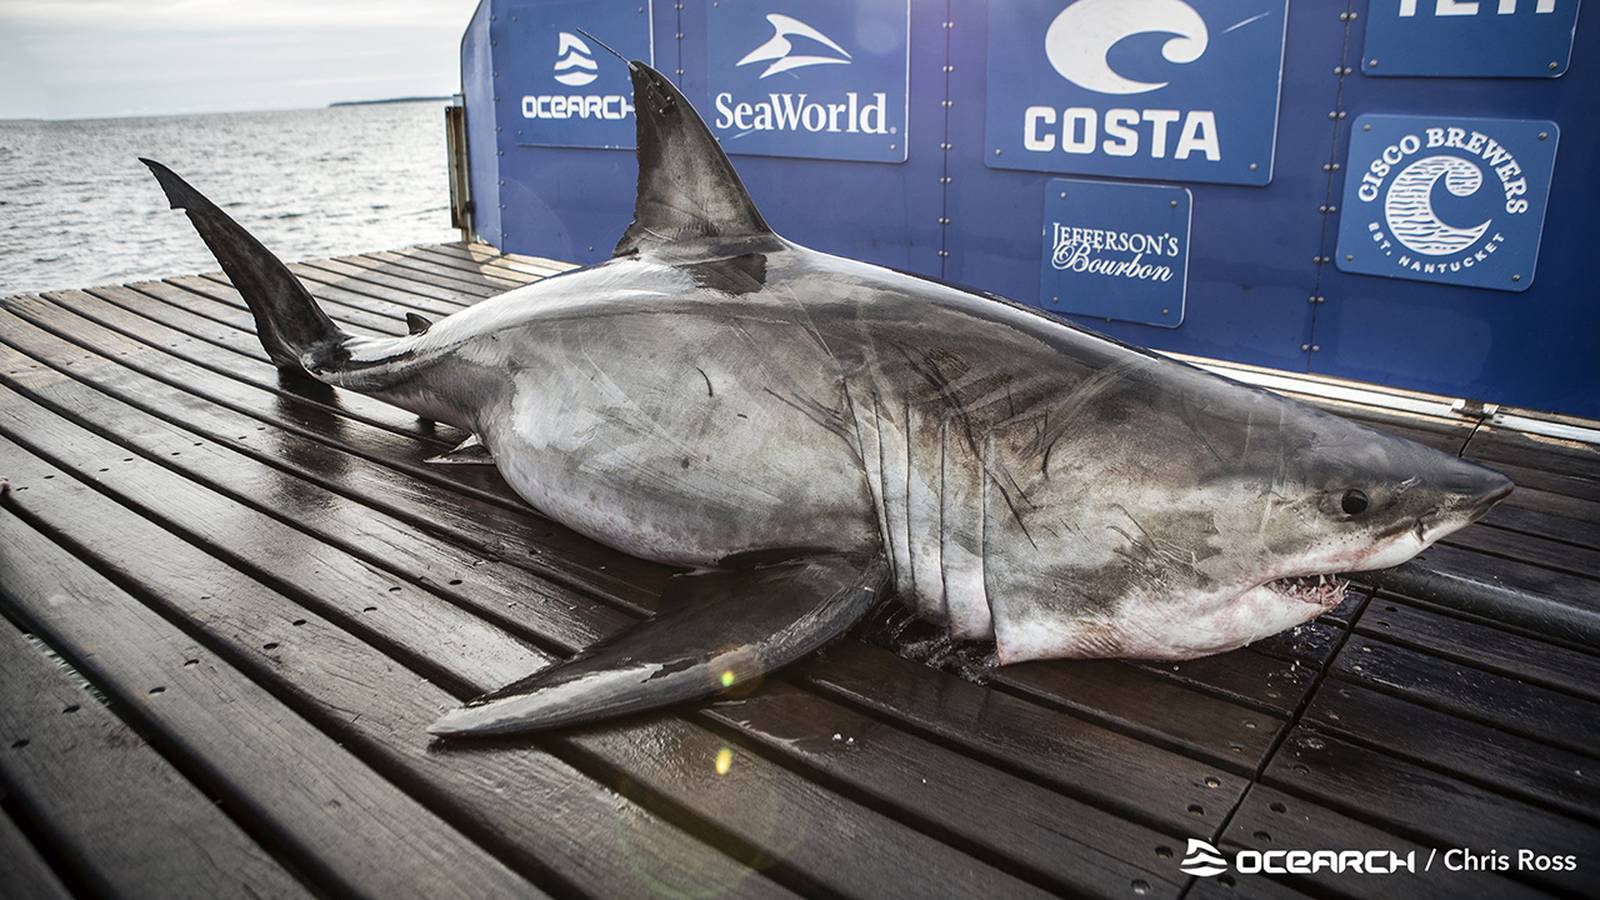 Nearly 12foot long great white shark ‘Freya’ tagged off Outer Banks